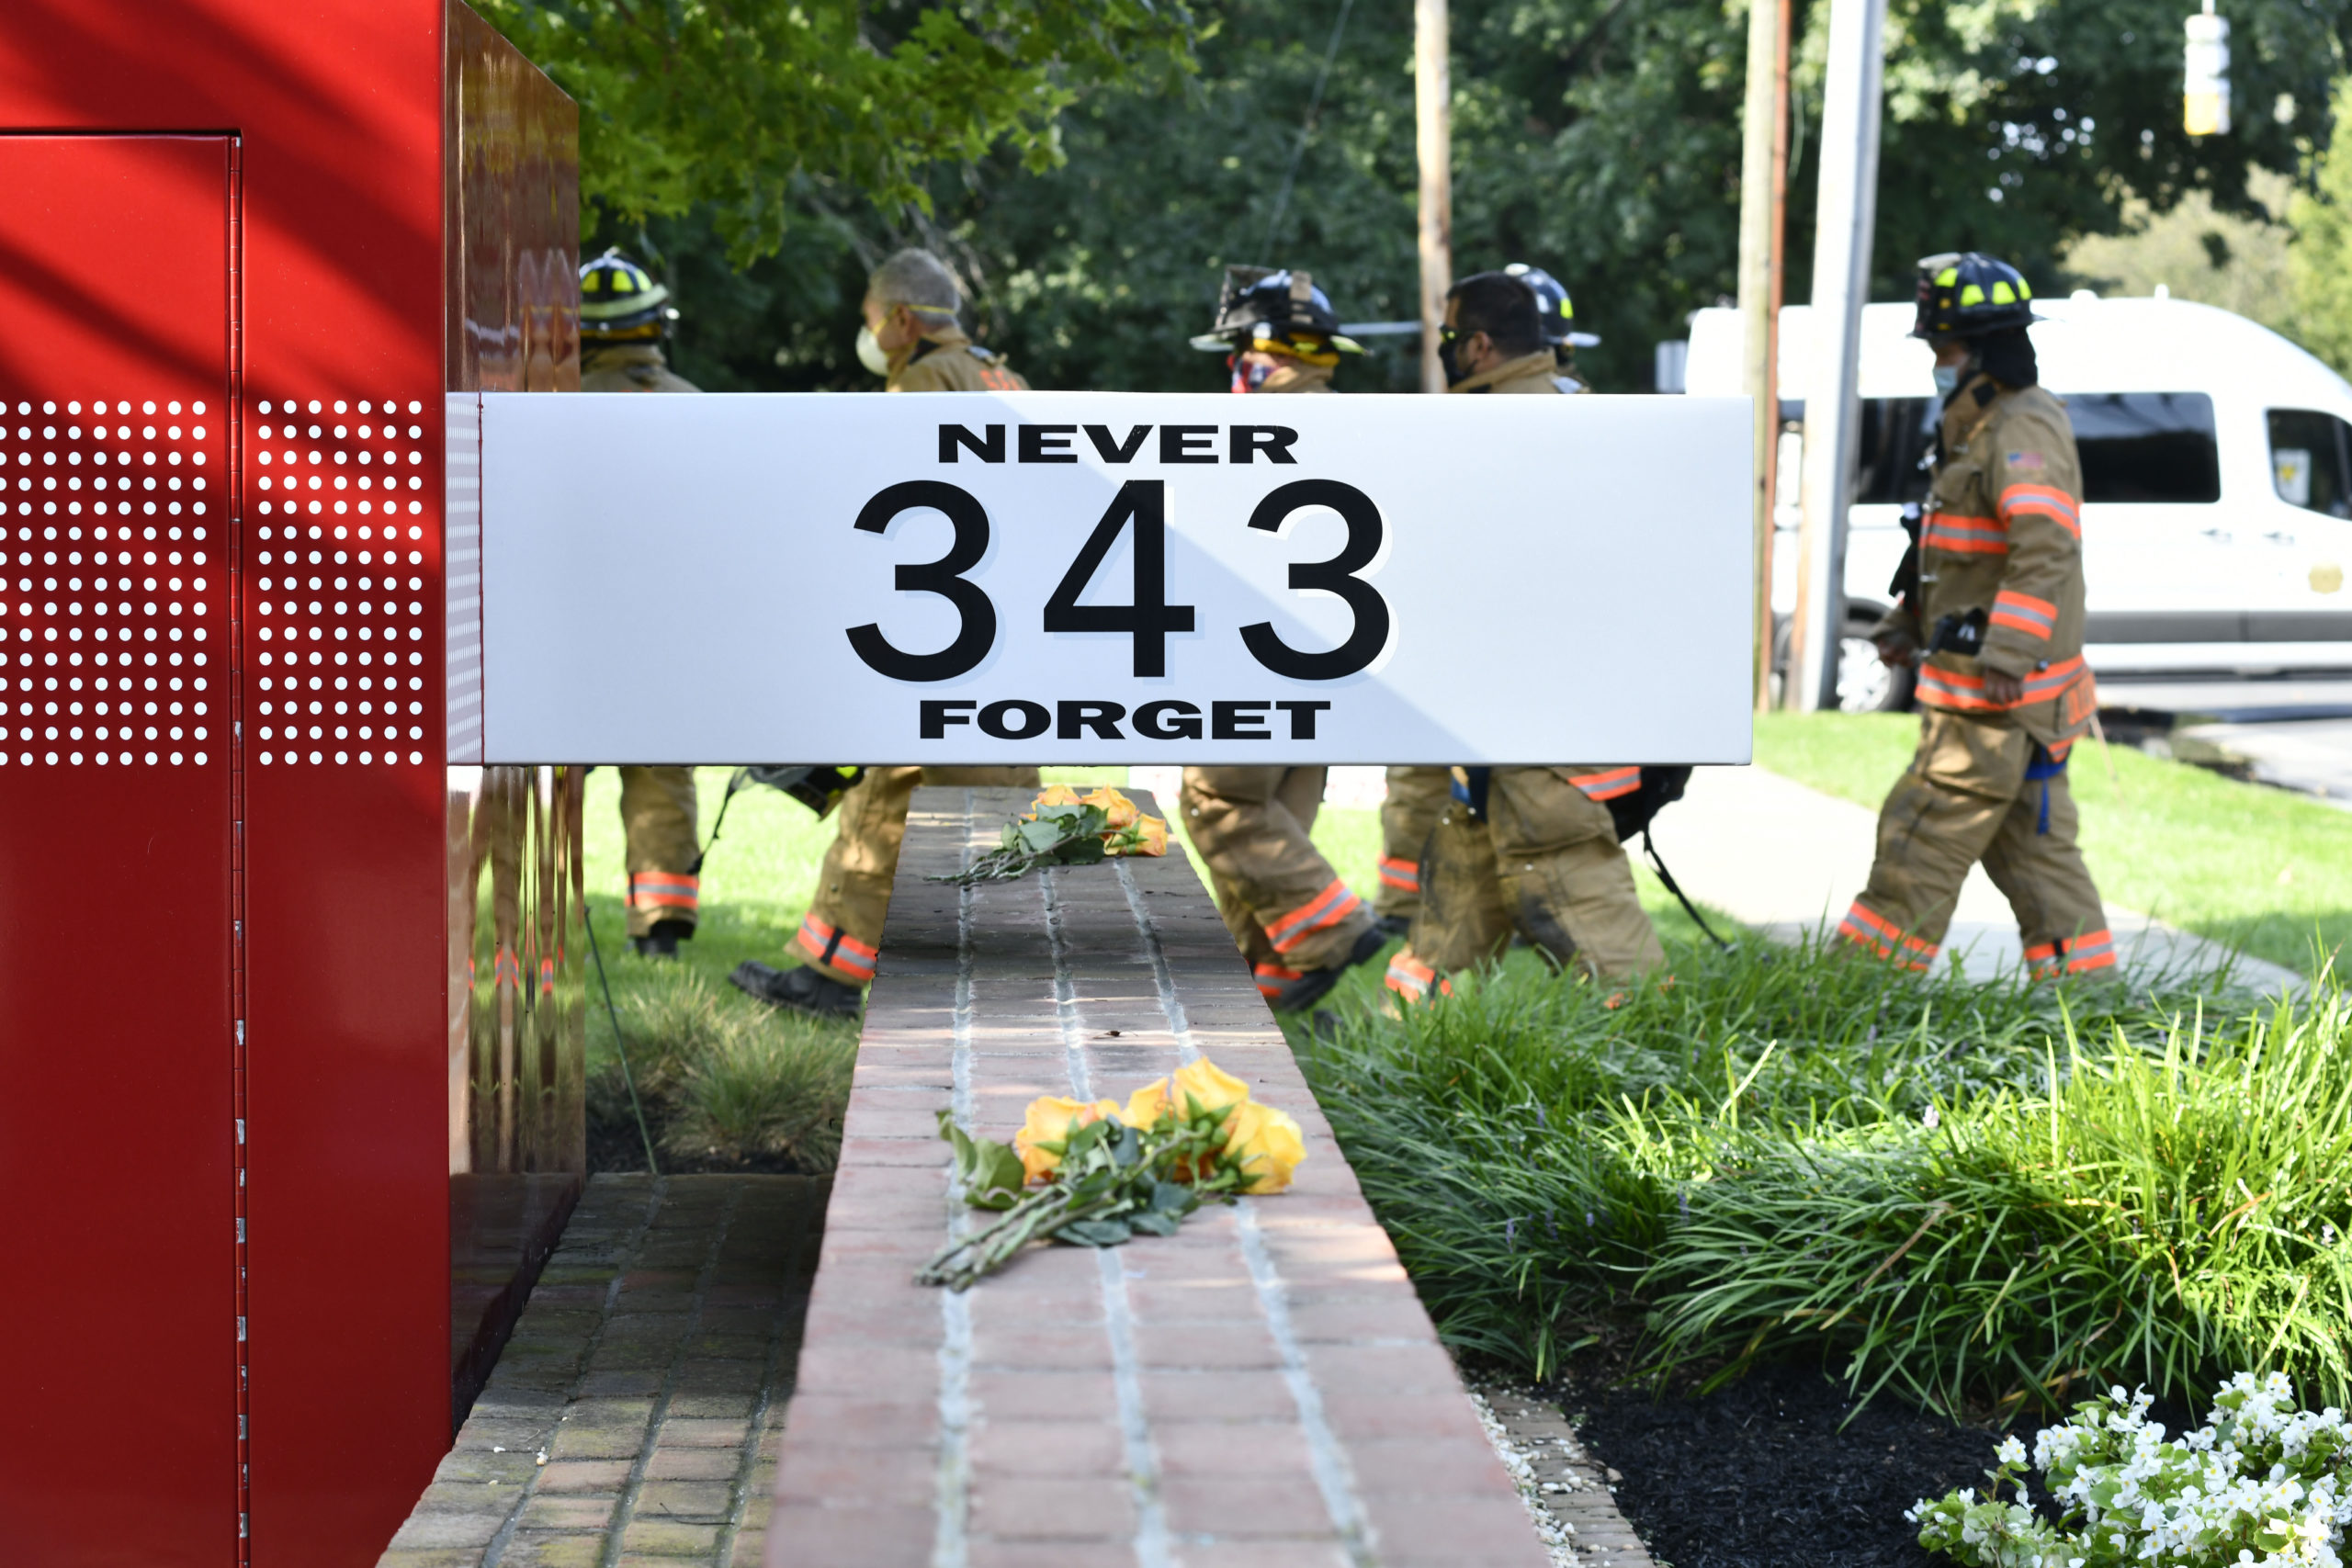 The Southampton Fire Department memorial on Friday morning.